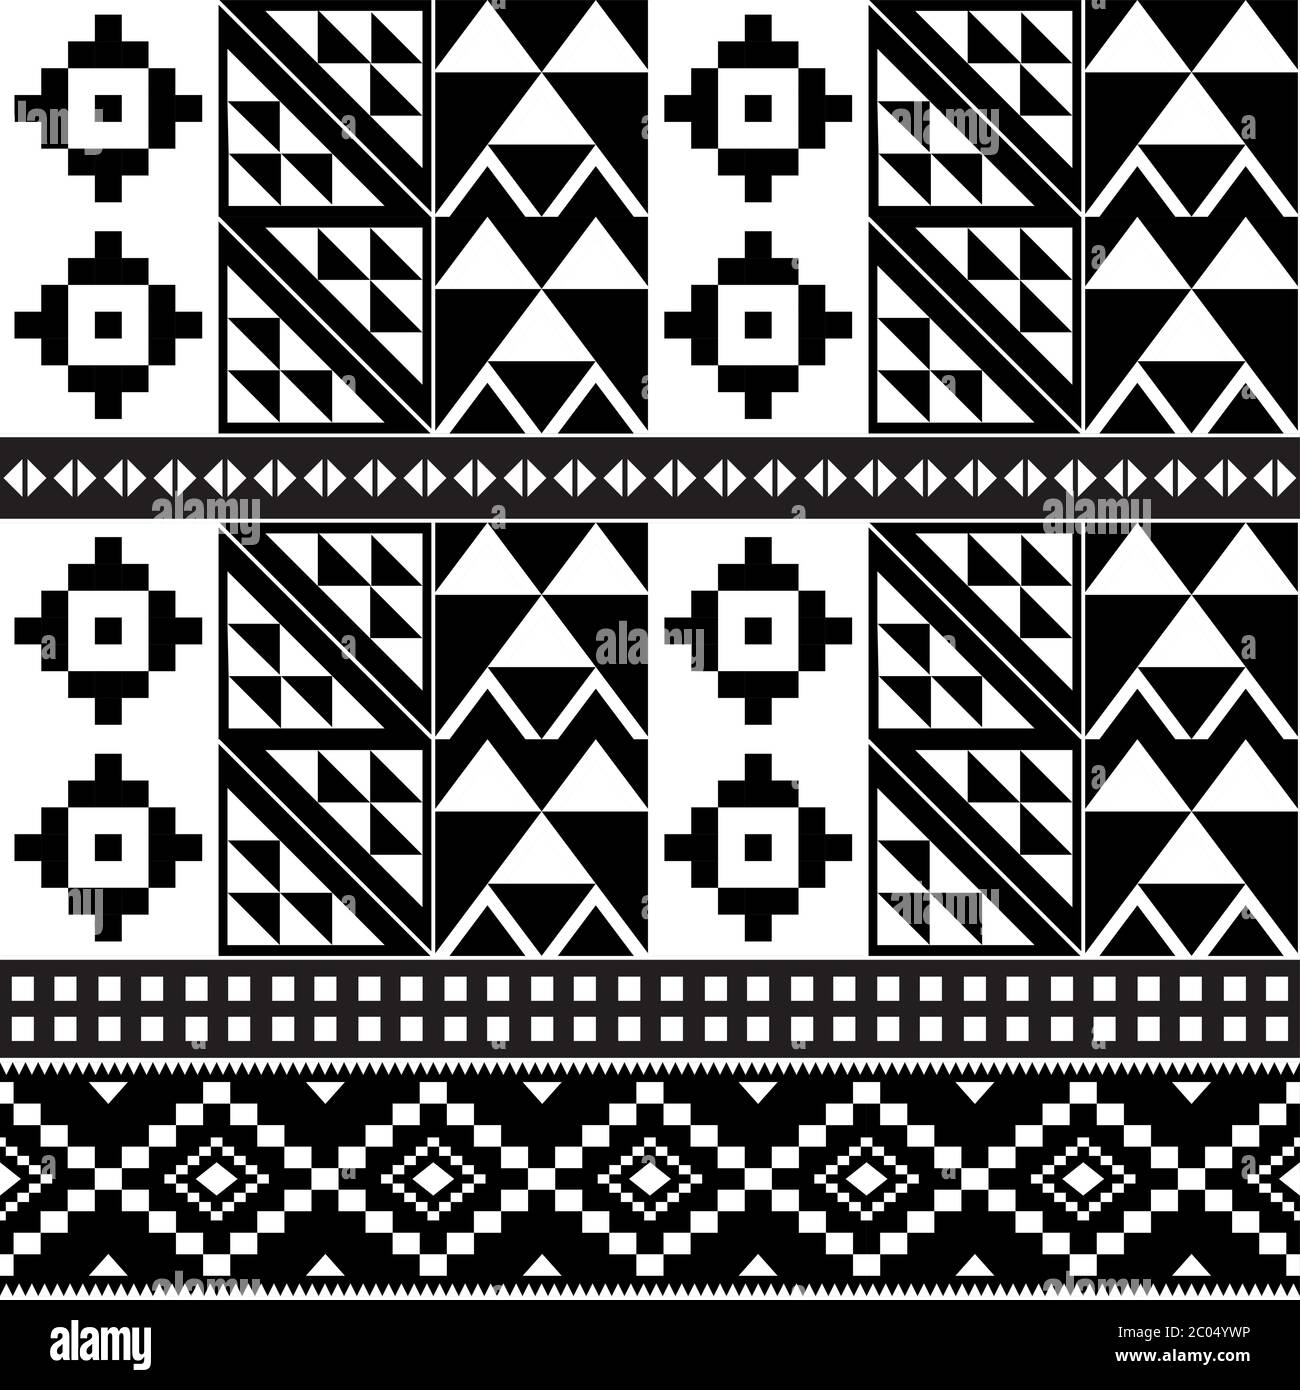 African Tribal Designs Black And White